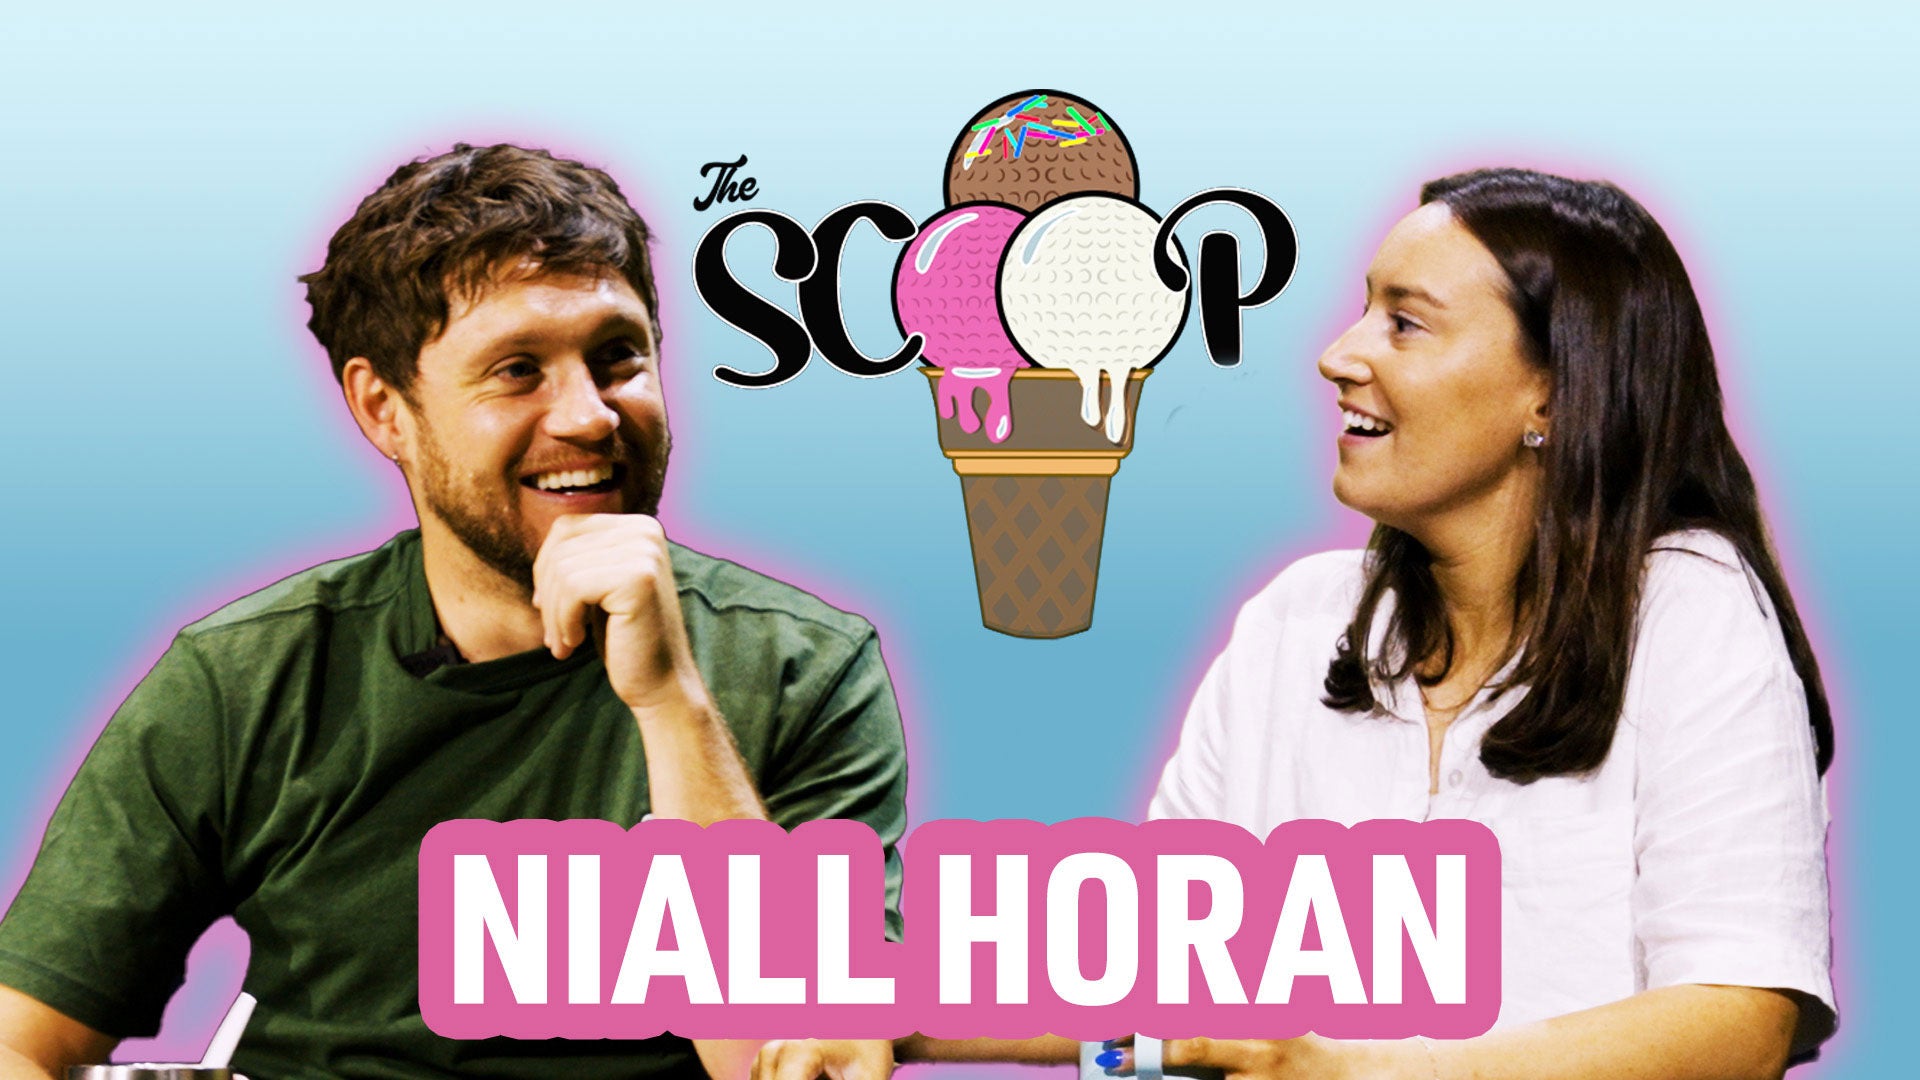 Niall Horan on the Scoop with Claire Rogers.